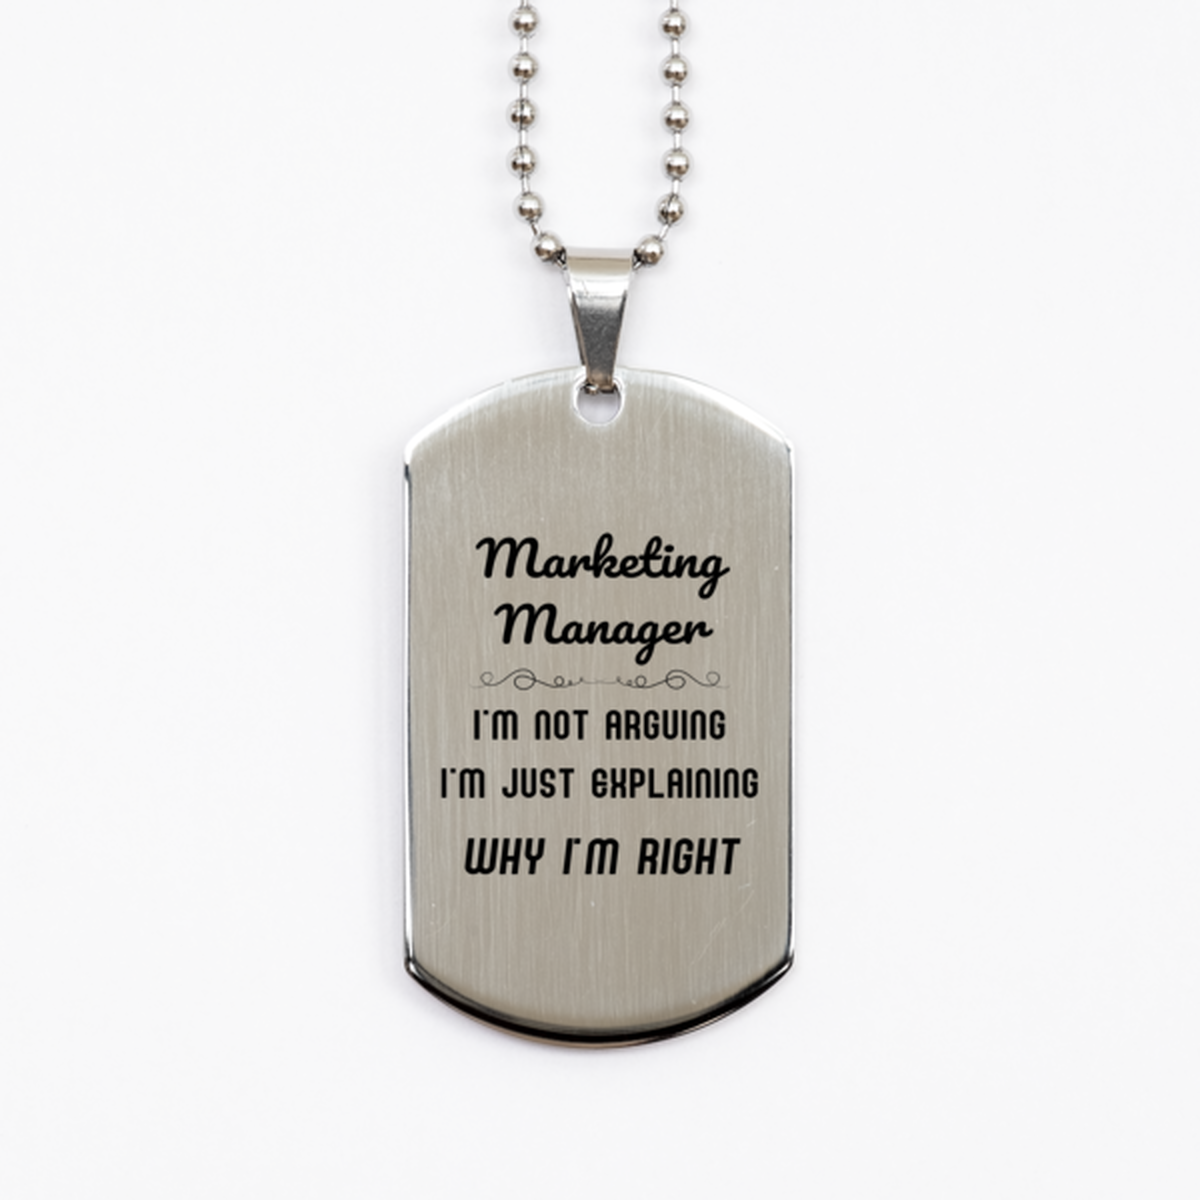 Marketing Manager I'm not Arguing. I'm Just Explaining Why I'm RIGHT Silver Dog Tag, Funny Saying Quote Marketing Manager Gifts For Marketing Manager Graduation Birthday Christmas Gifts for Men Women Coworker